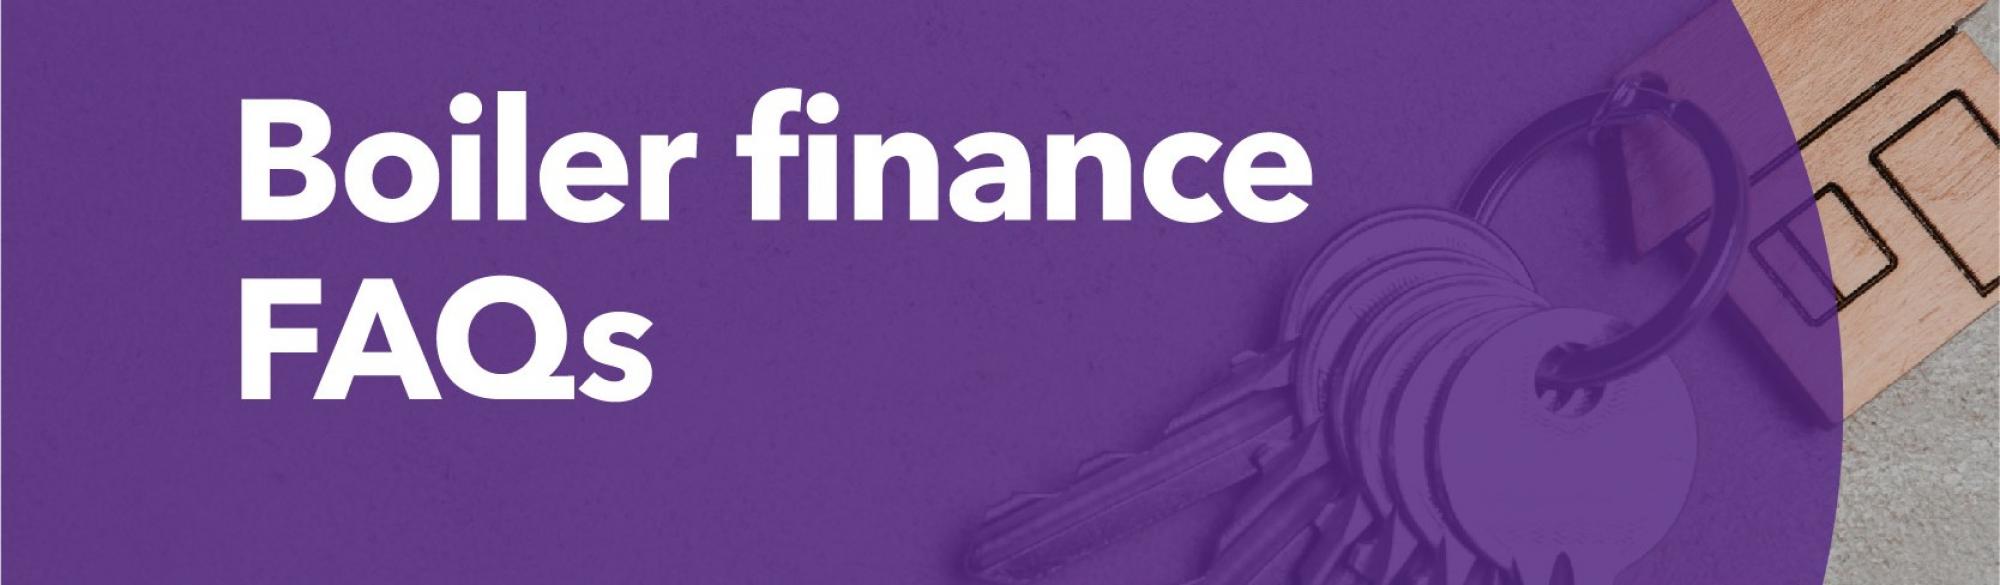 Boiler finance FAQs for homeowners & landlords by Bolton's BHE Services